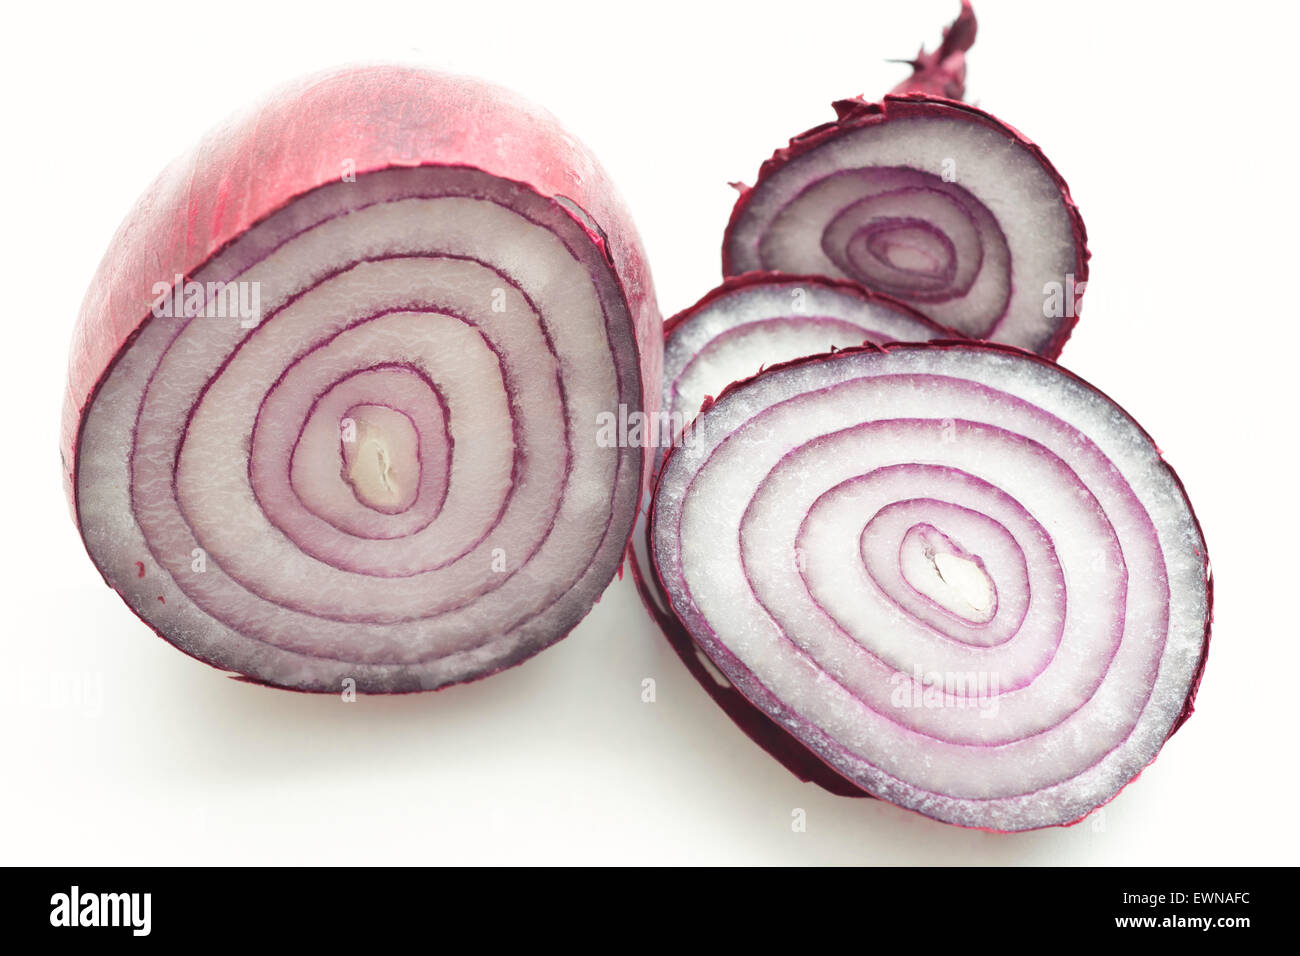 stack, fresh, cut, red, onion, slice, isolated, white, ring, circle, many, food, nutrition, healthy, vitamins, vegetable, ripe, Stock Photo